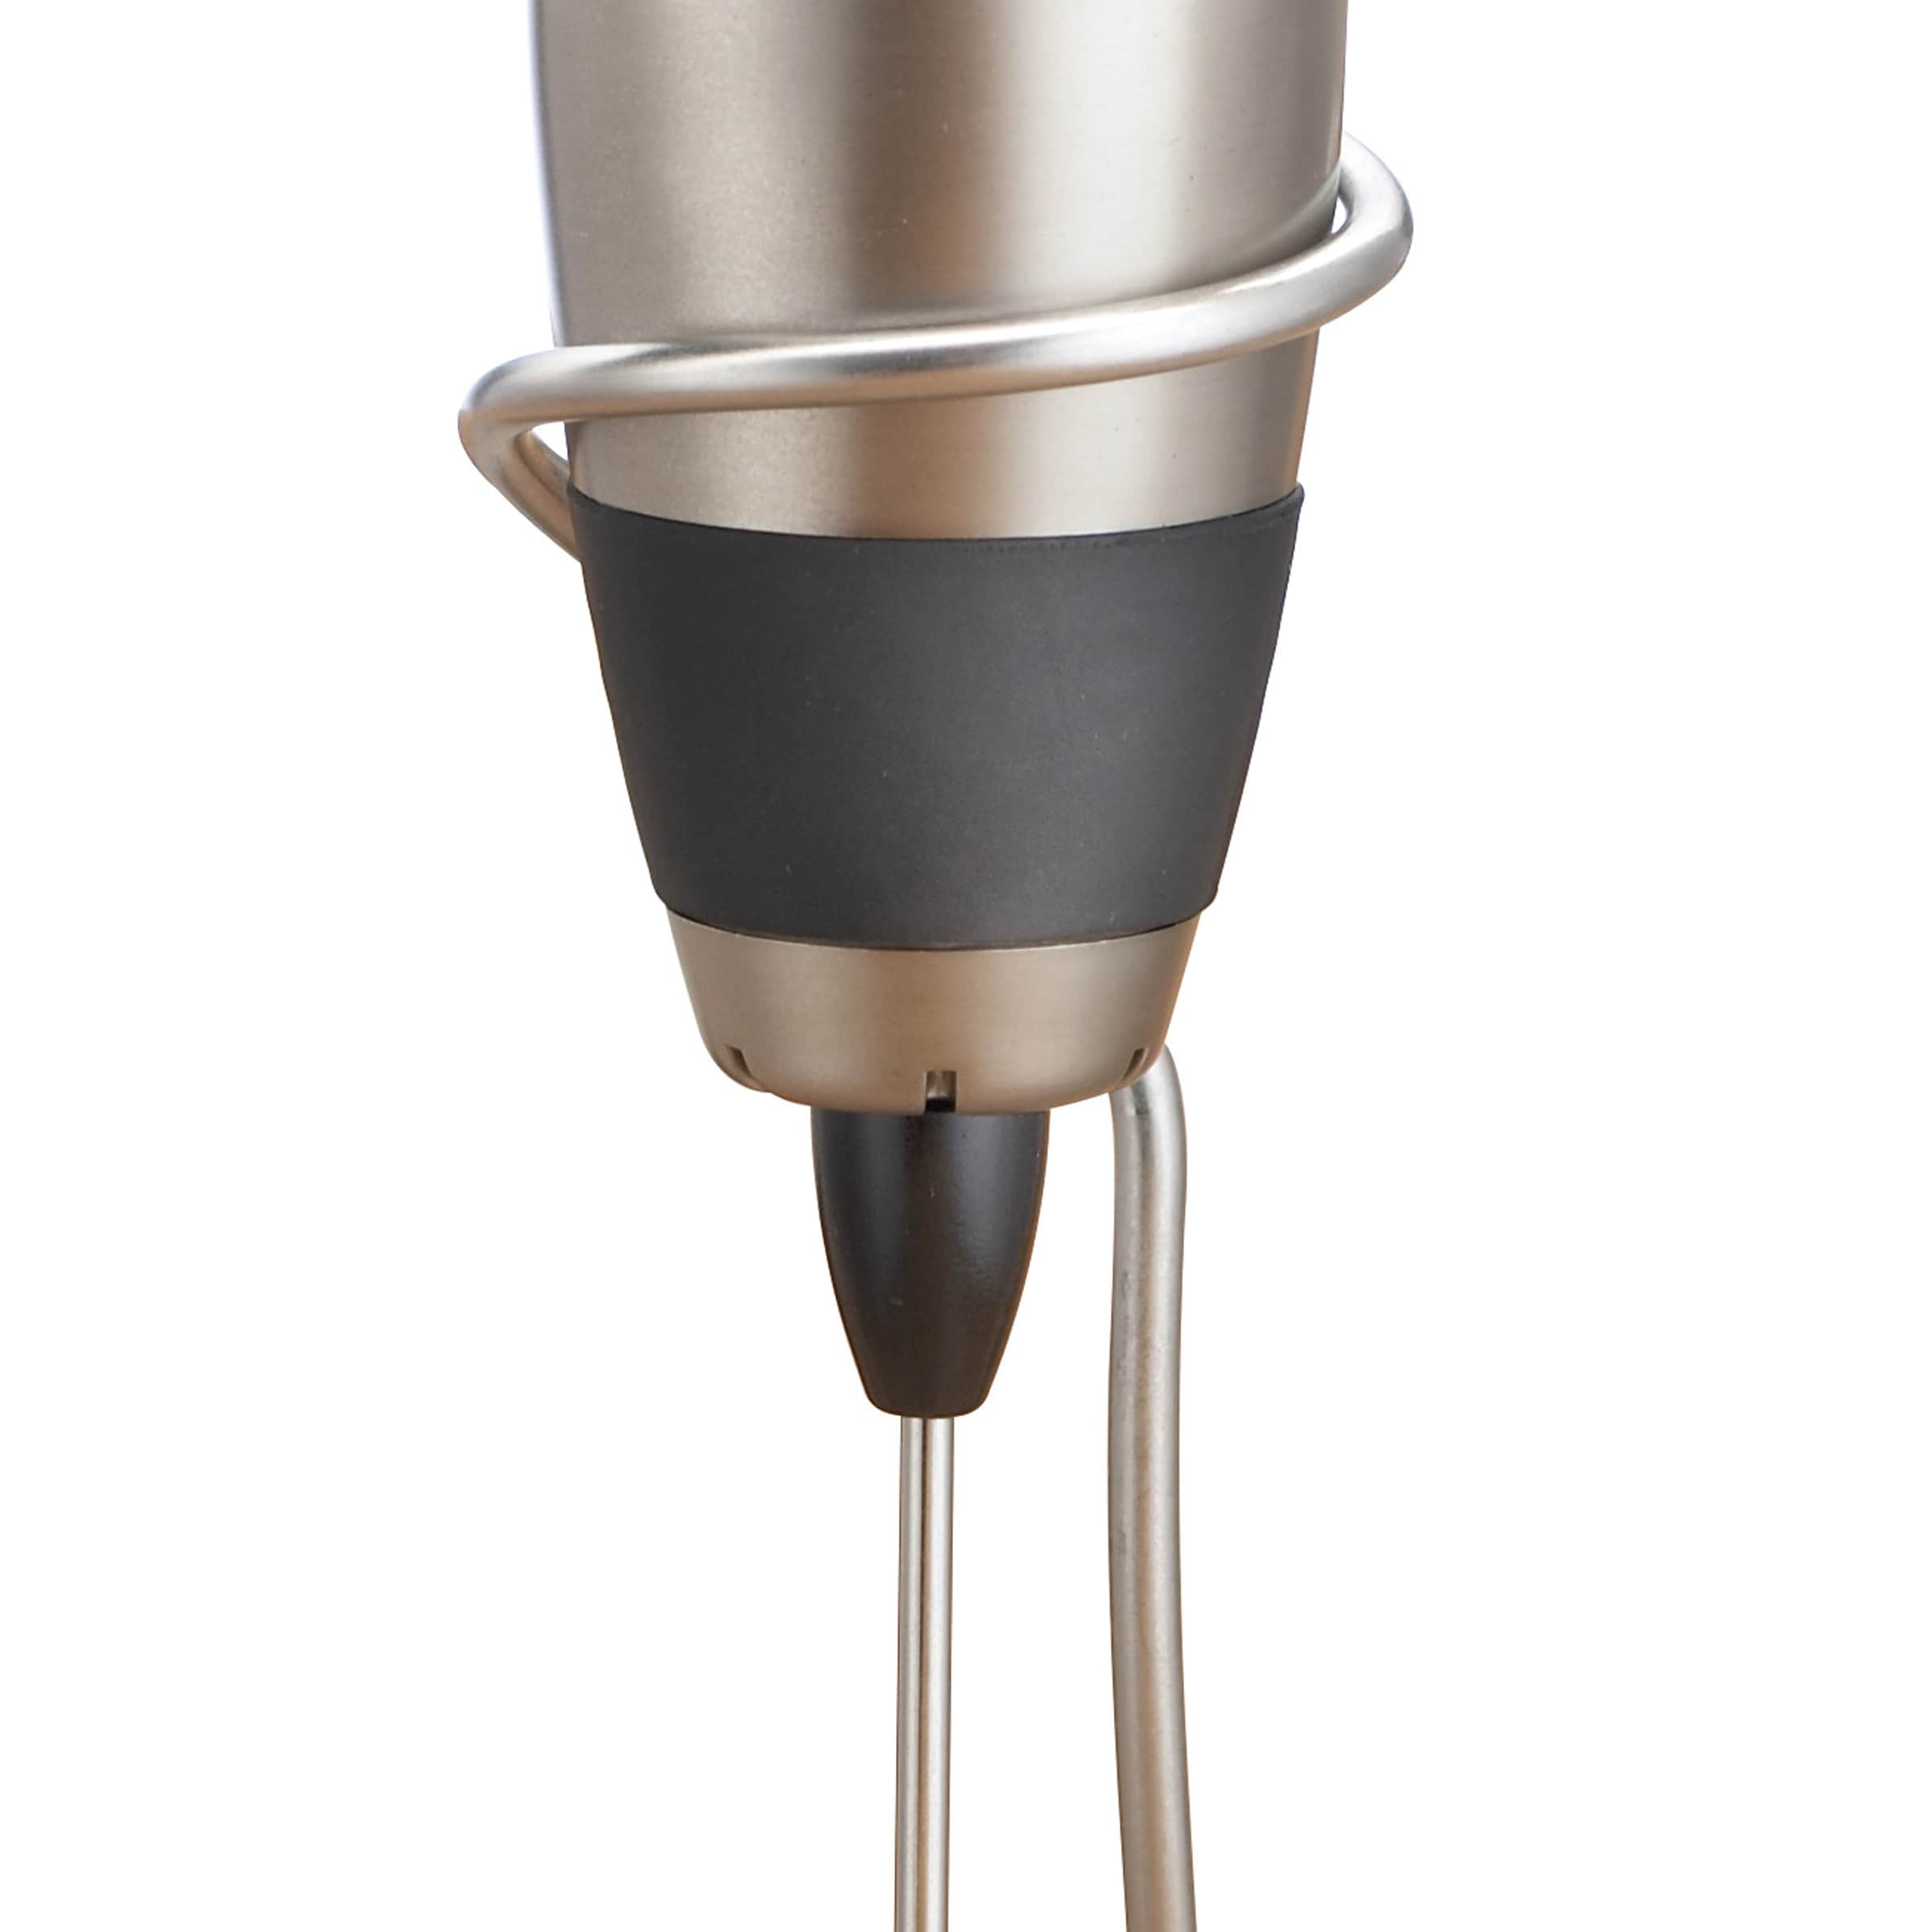 BonJour Mini - Milk frother - silver